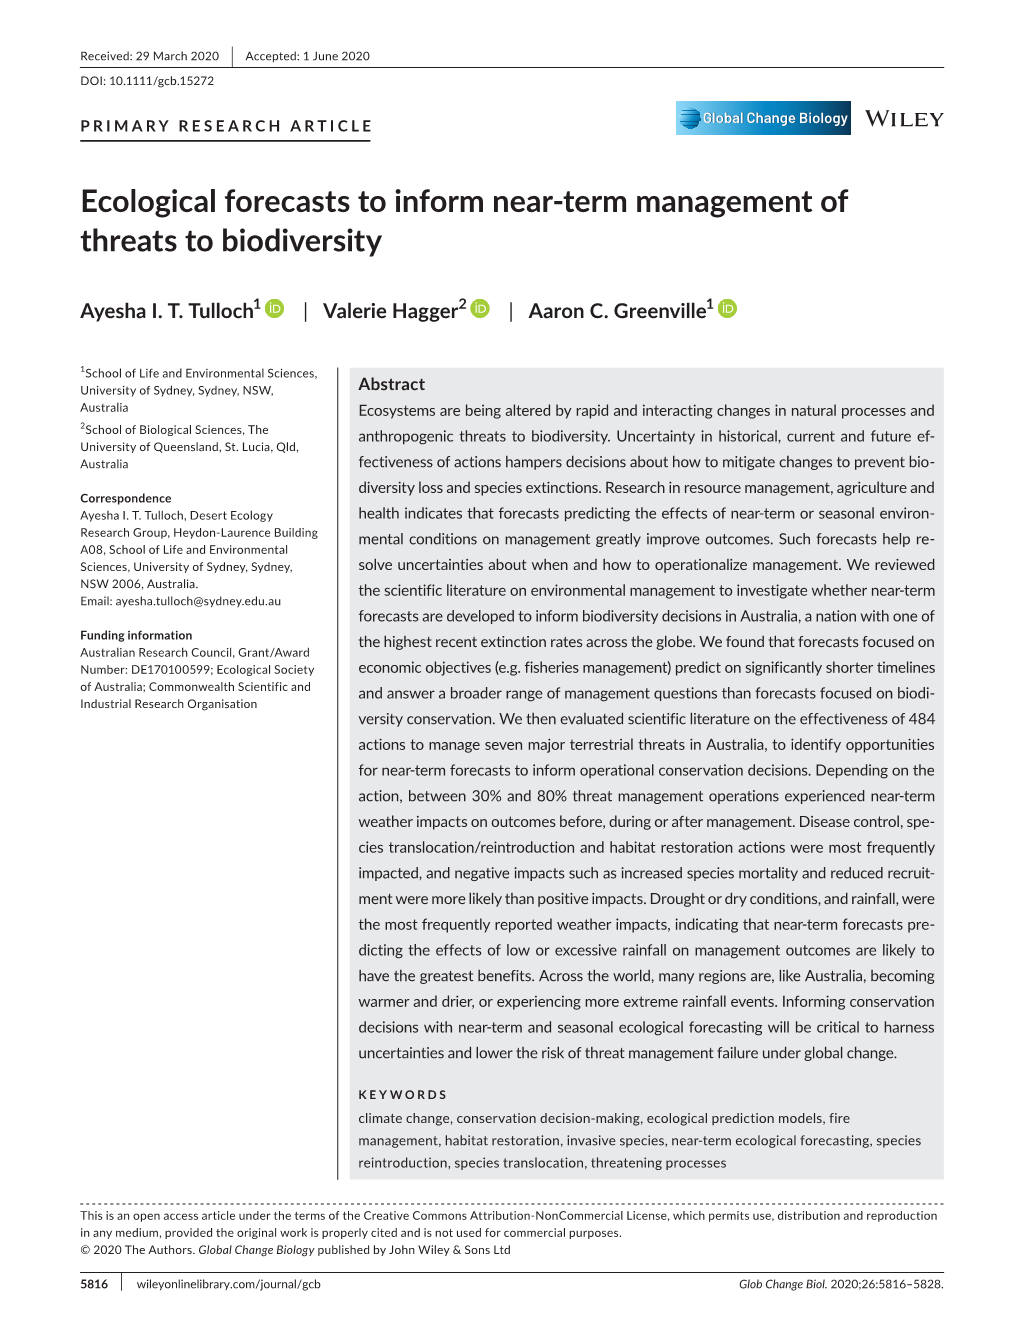 Ecological Forecasts to Inform Near-Term Management of Threats to Biodiversity